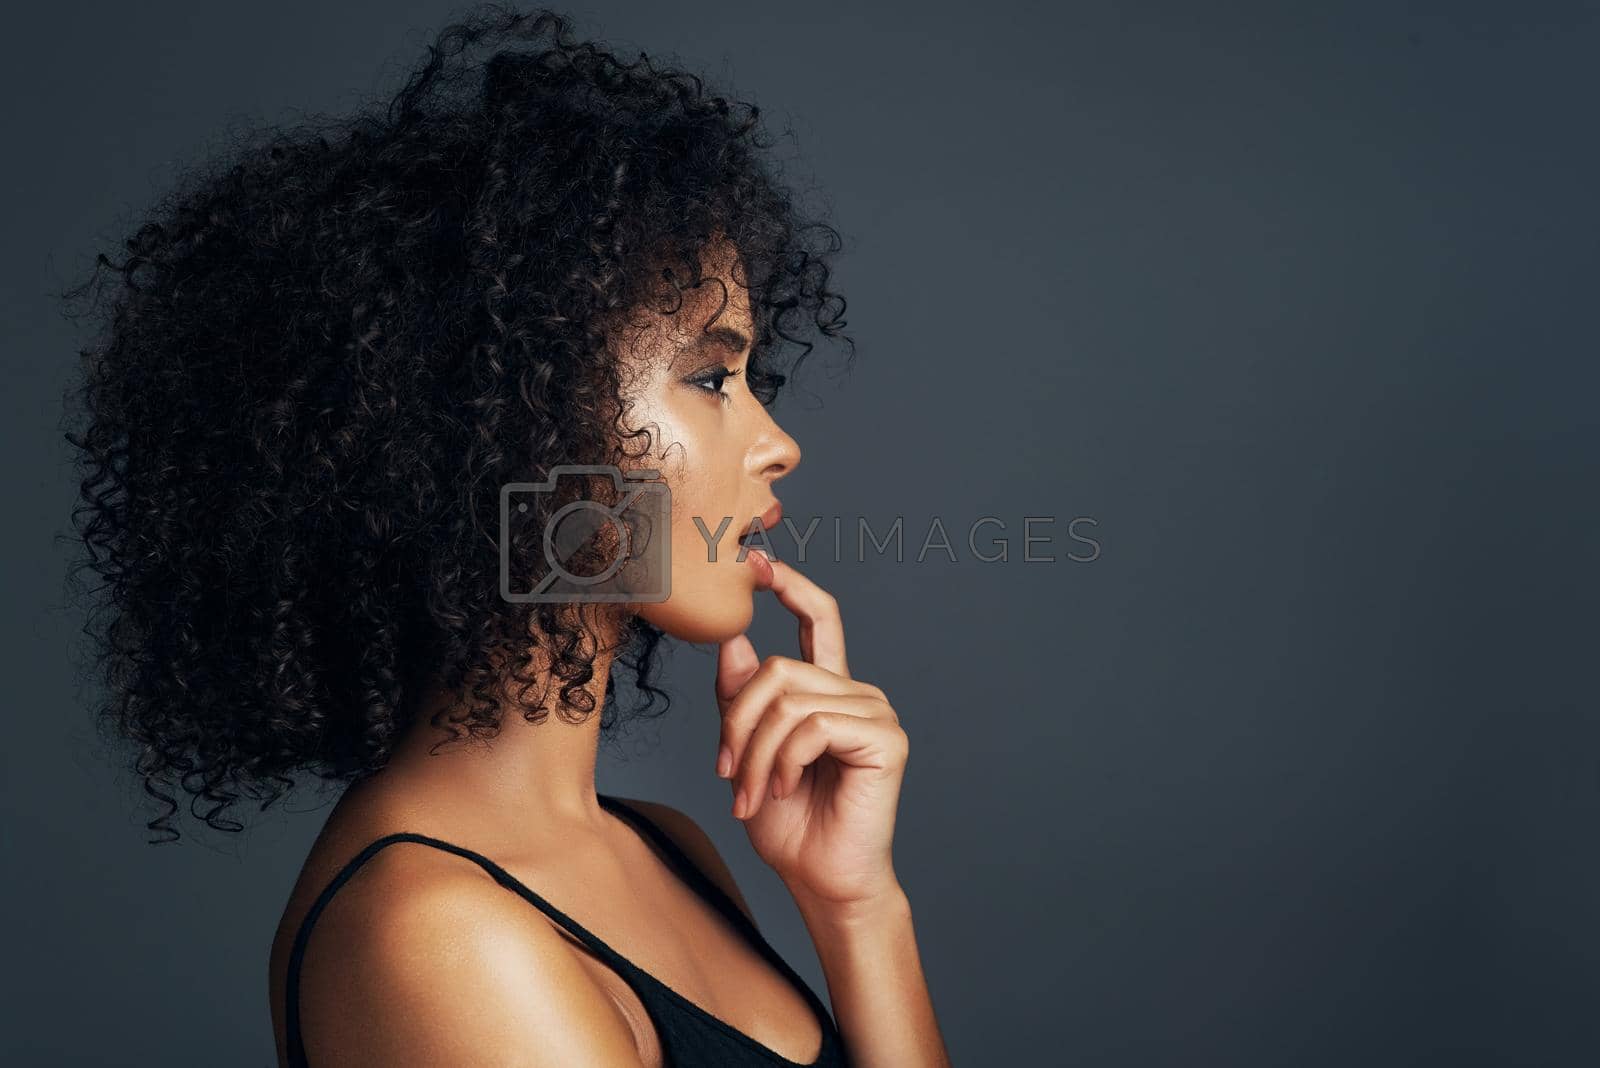 Studio shot of a beautiful young woman posing against a dark background.